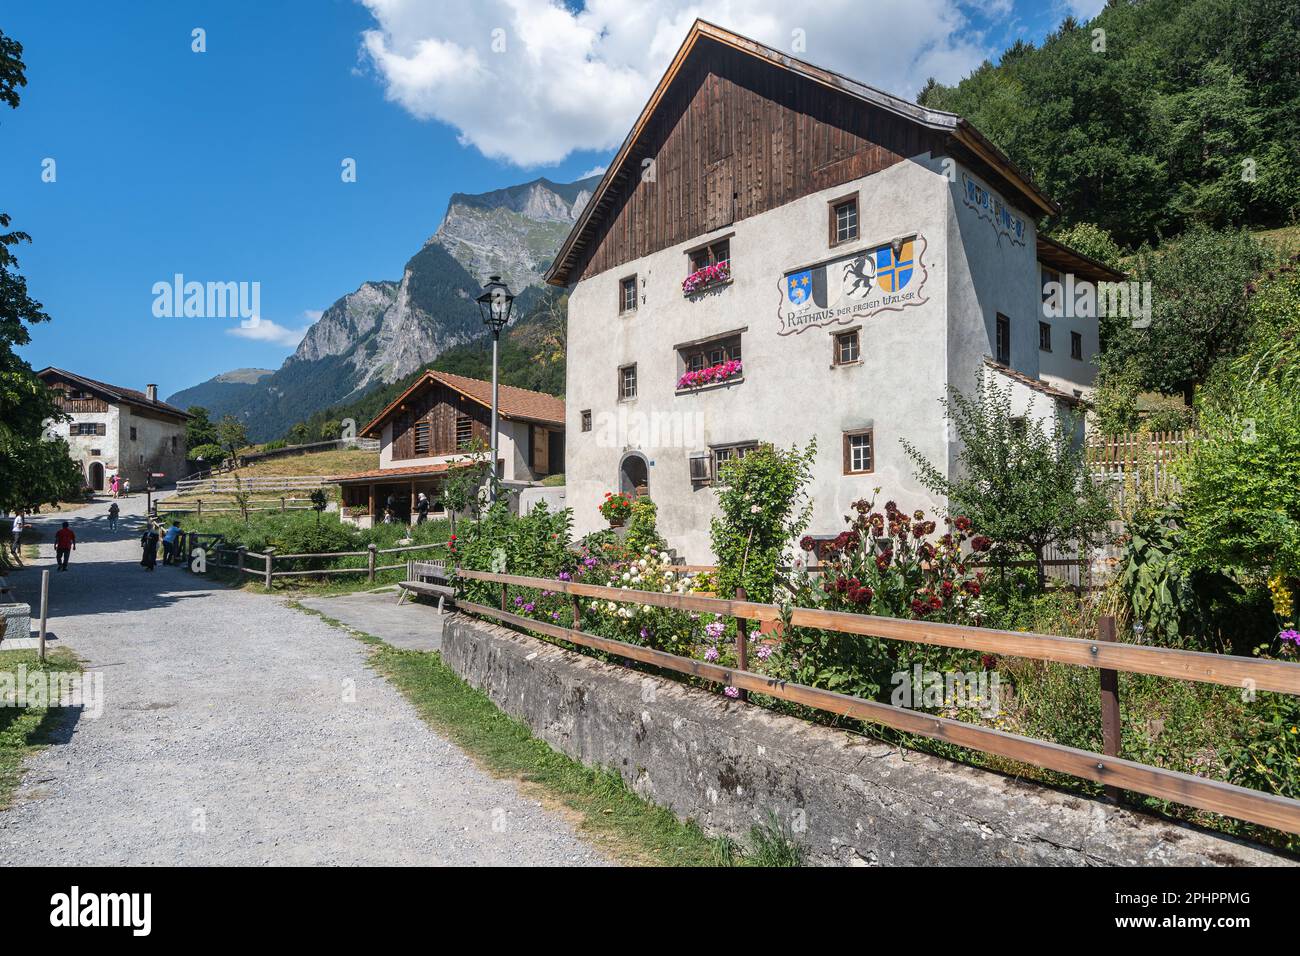 The Heididorf (Heidi's Village), an open-air museum dedicated to the famous fictional character of Heidi. Maienfeld, Switzerland, Aug. 2022 Stock Photo